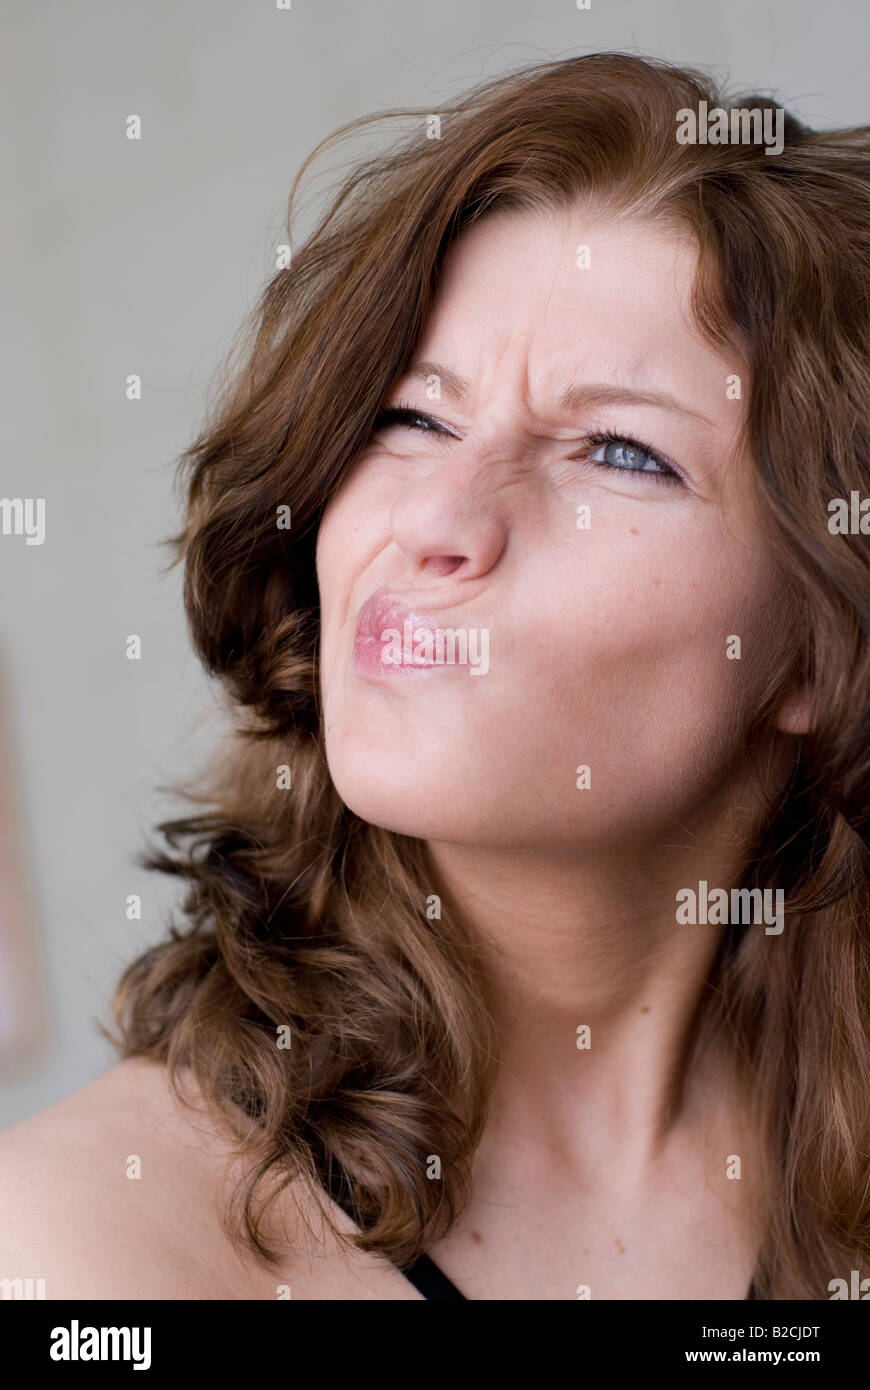 Portrait young woman, gurning Stock Photo